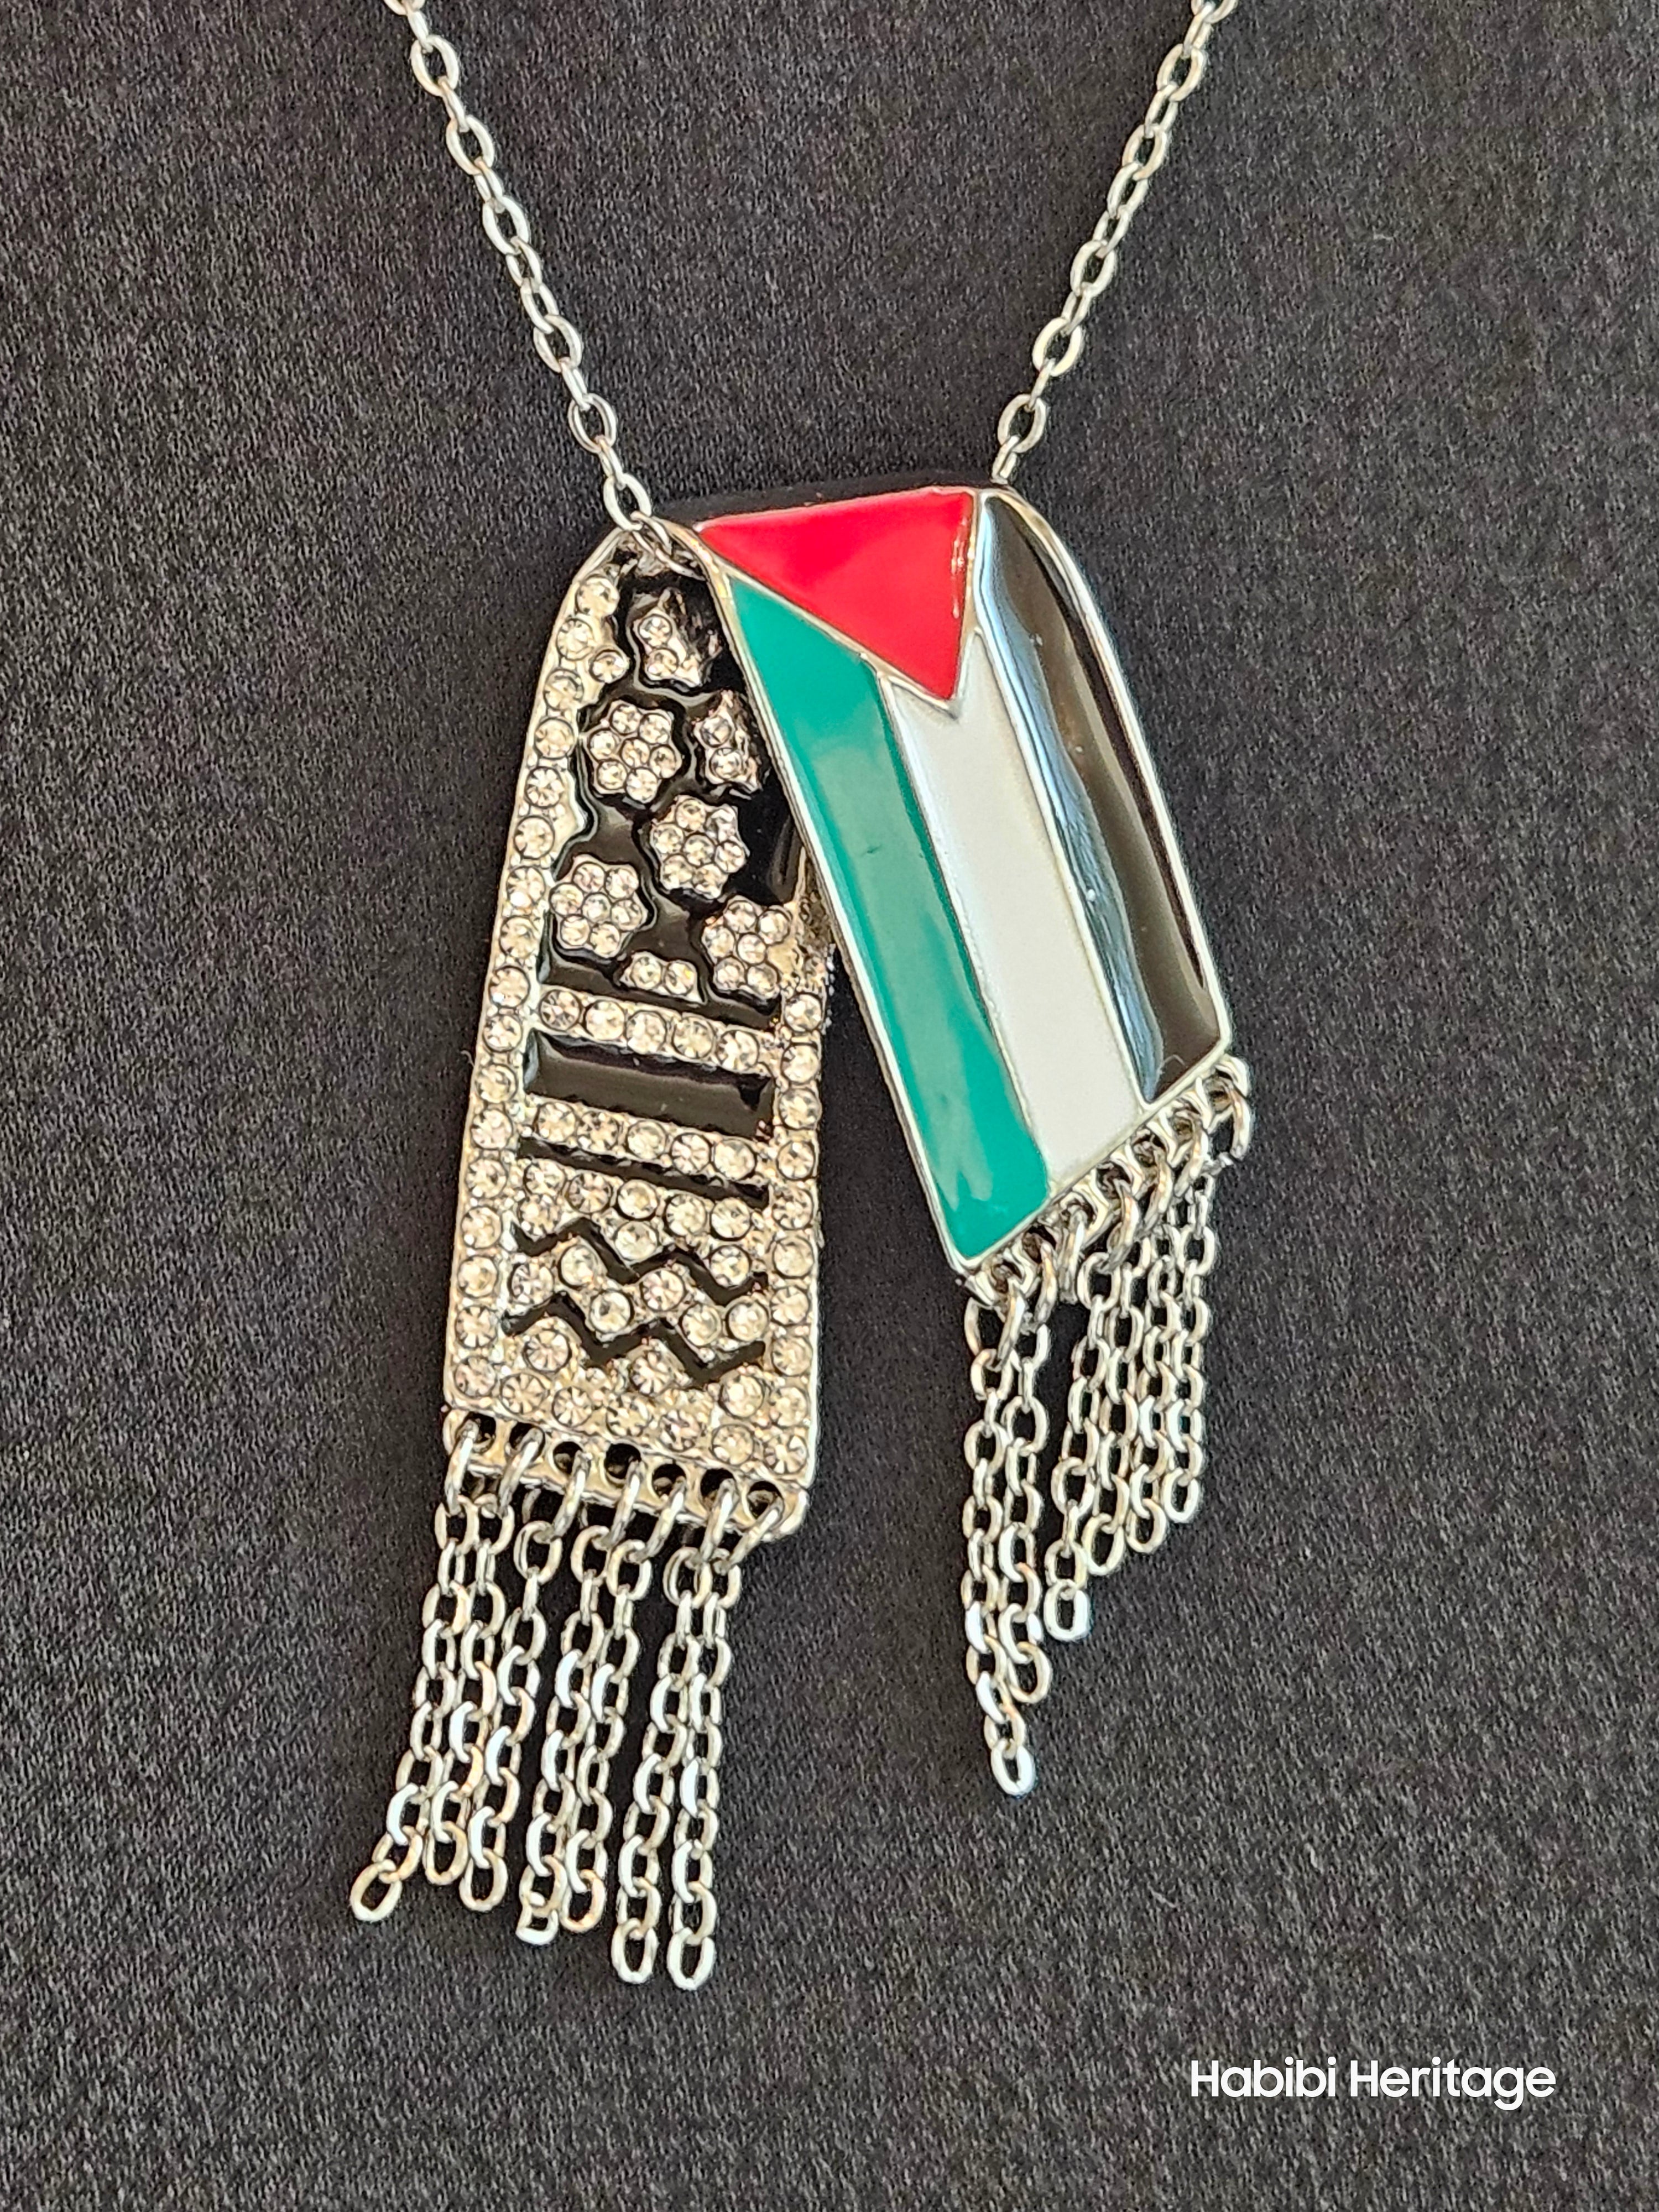 Palestine Keffiyeh Necklace - 3 options - Gold or Silver